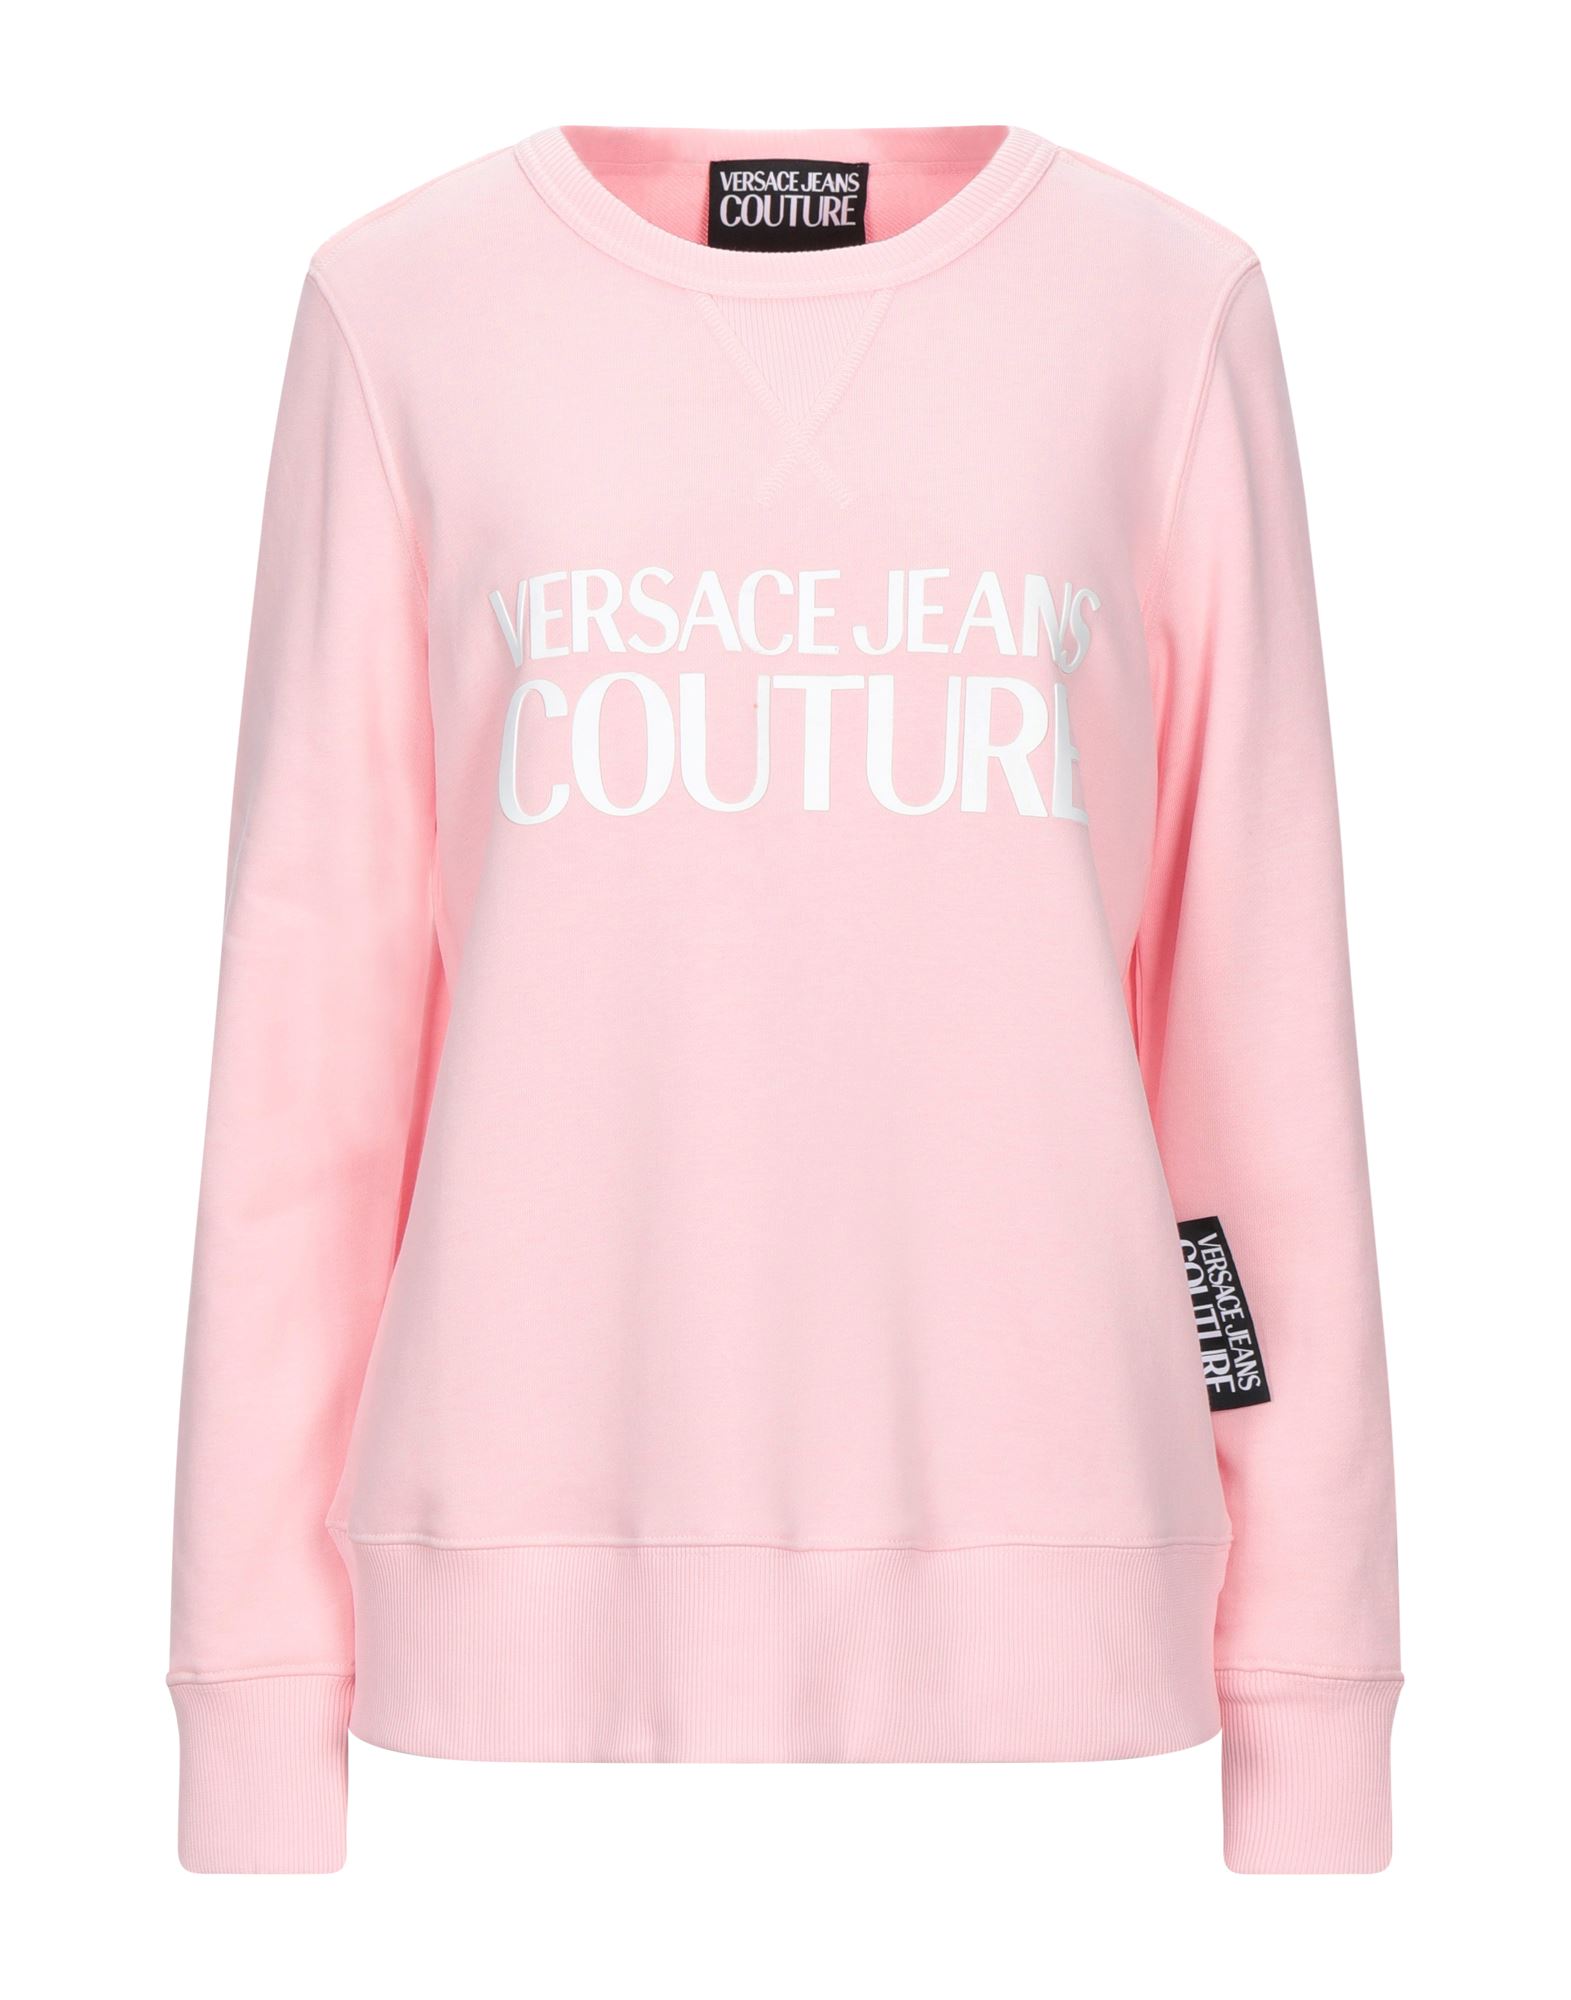 Versace Jeans Couture Sweatshirts In Pink